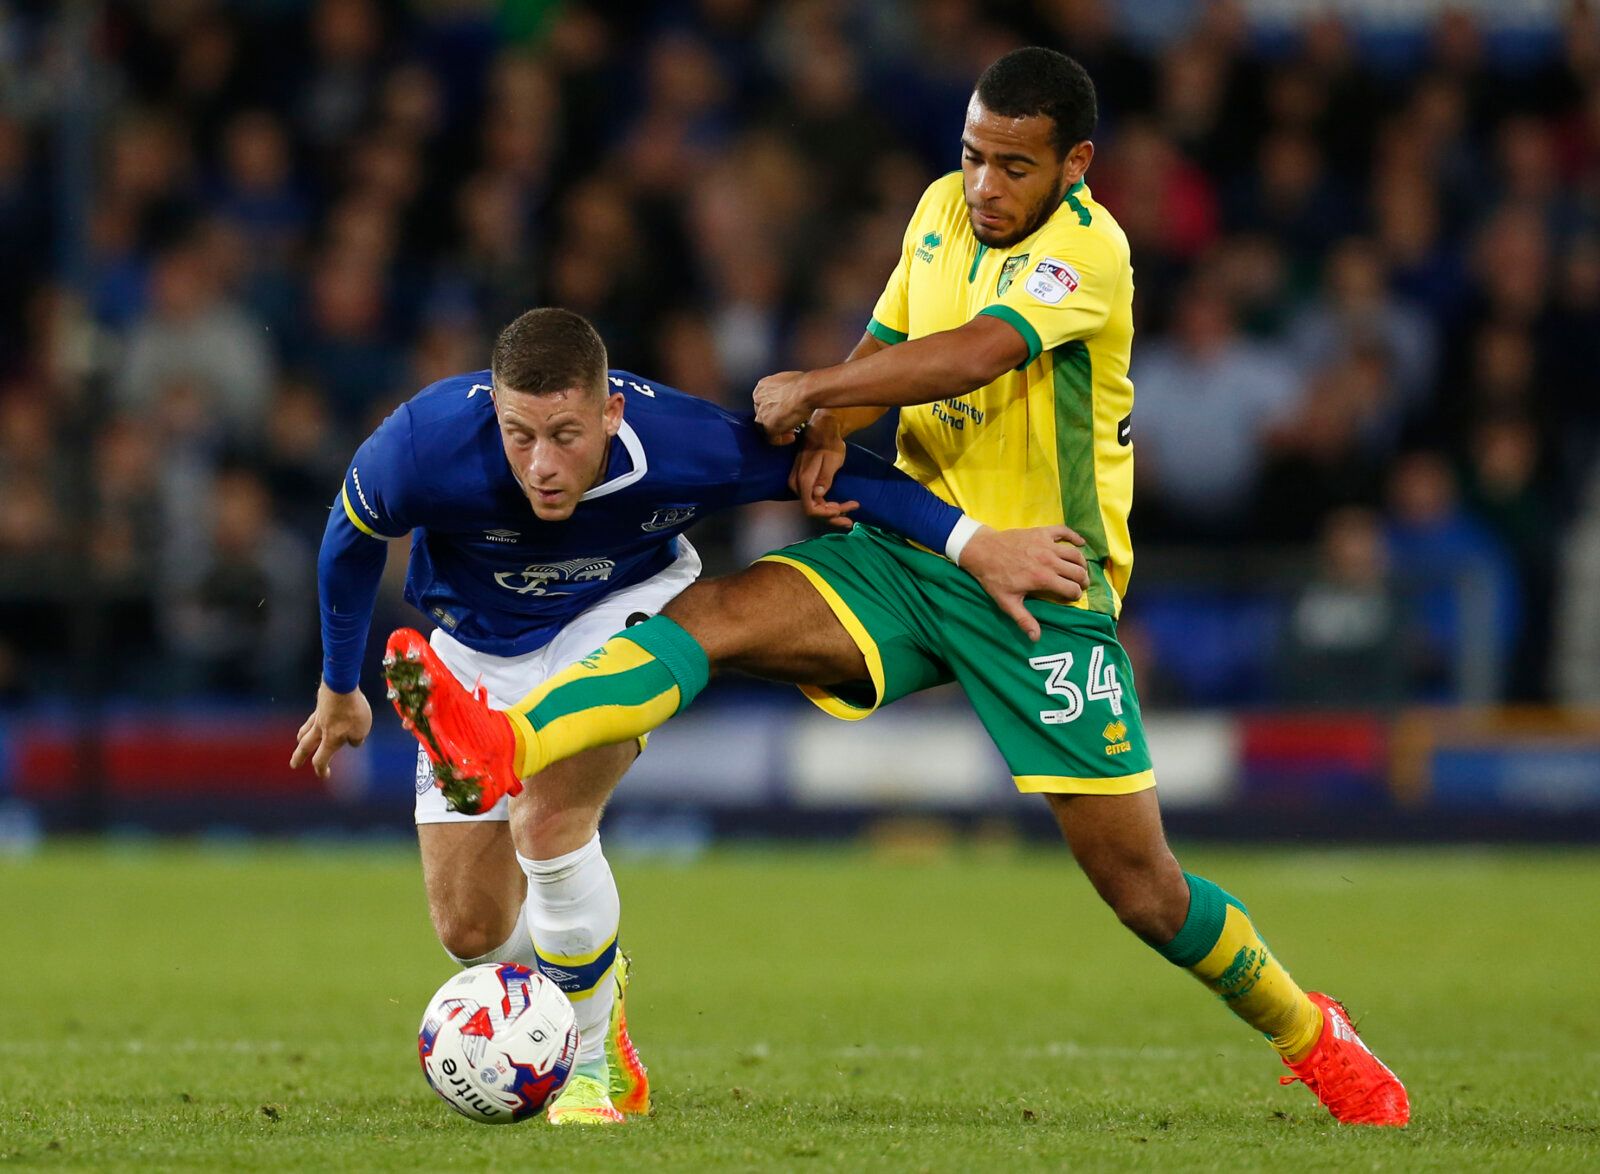 Britain Football Soccer - Everton v Norwich City - EFL Cup Third Round - Goodison Park - 20/9/16
Everton's Ross Barkley in action with Norwich City's Louis Thompson  
Action Images via Reuters / Ed Sykes
Livepic
EDITORIAL USE ONLY. No use with unauthorized audio, video, data, fixture lists, club/league logos or 